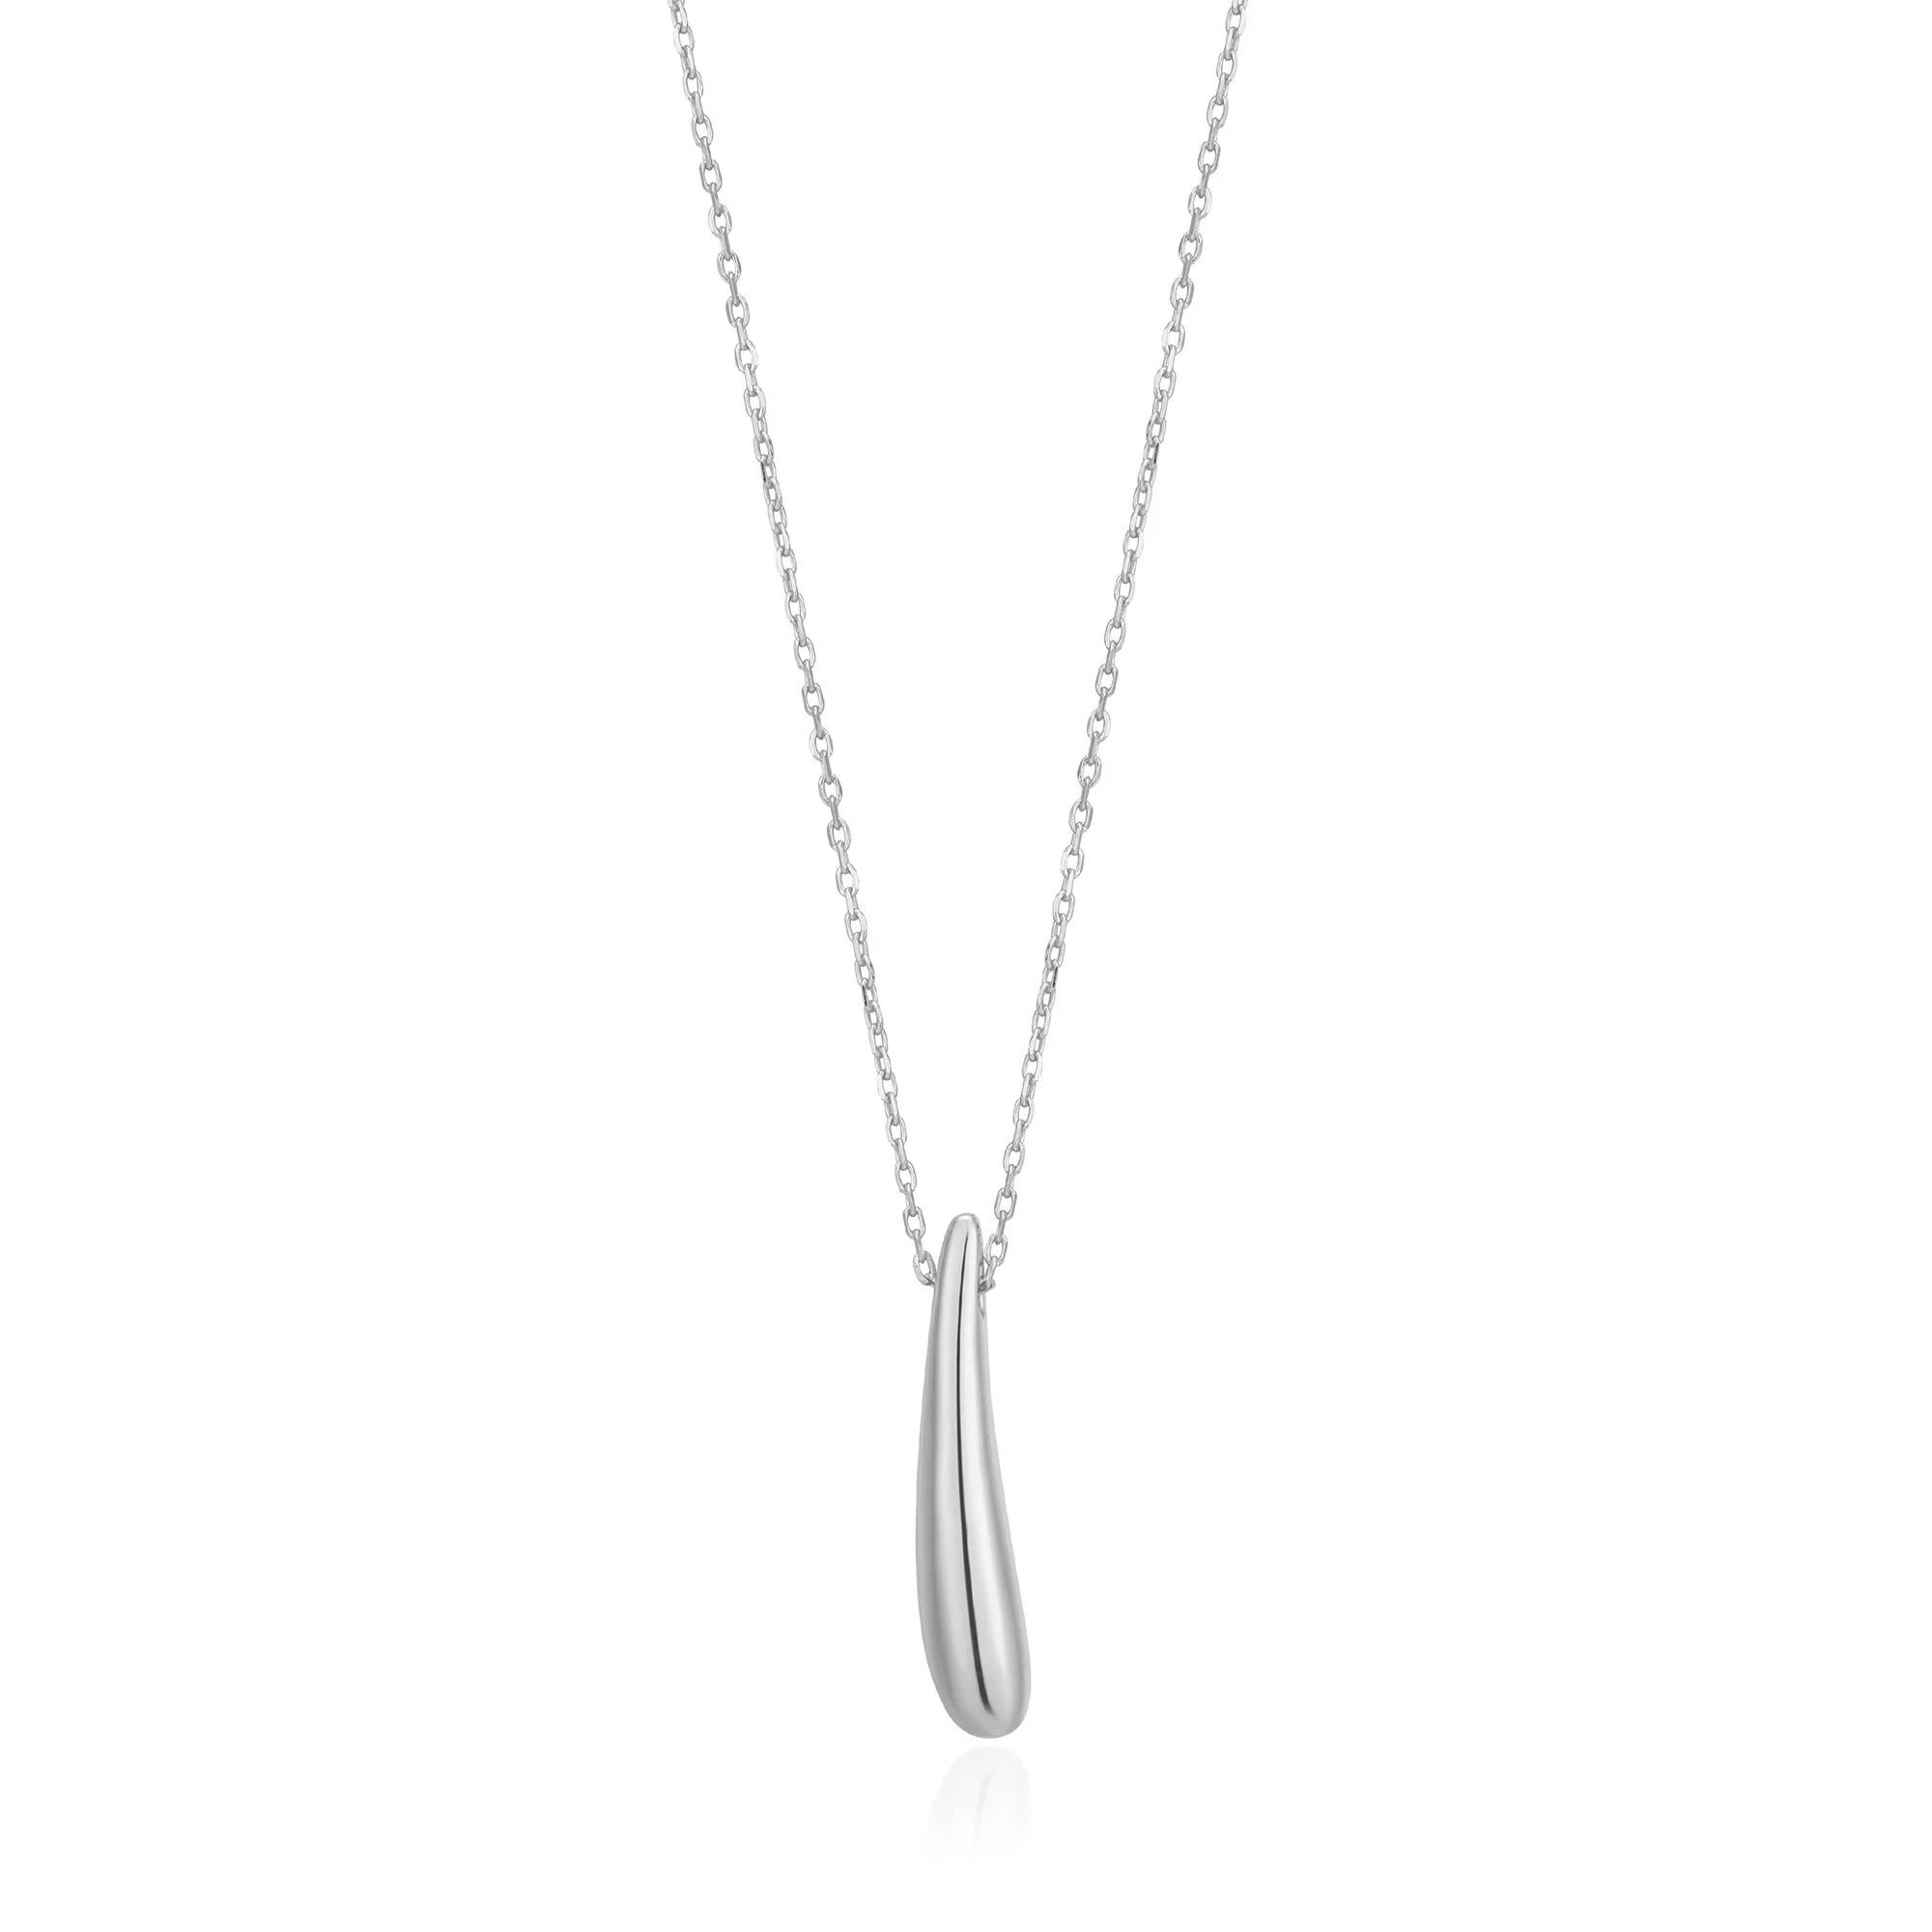 ANIA HAIE Silver Luxe Drop Necklace